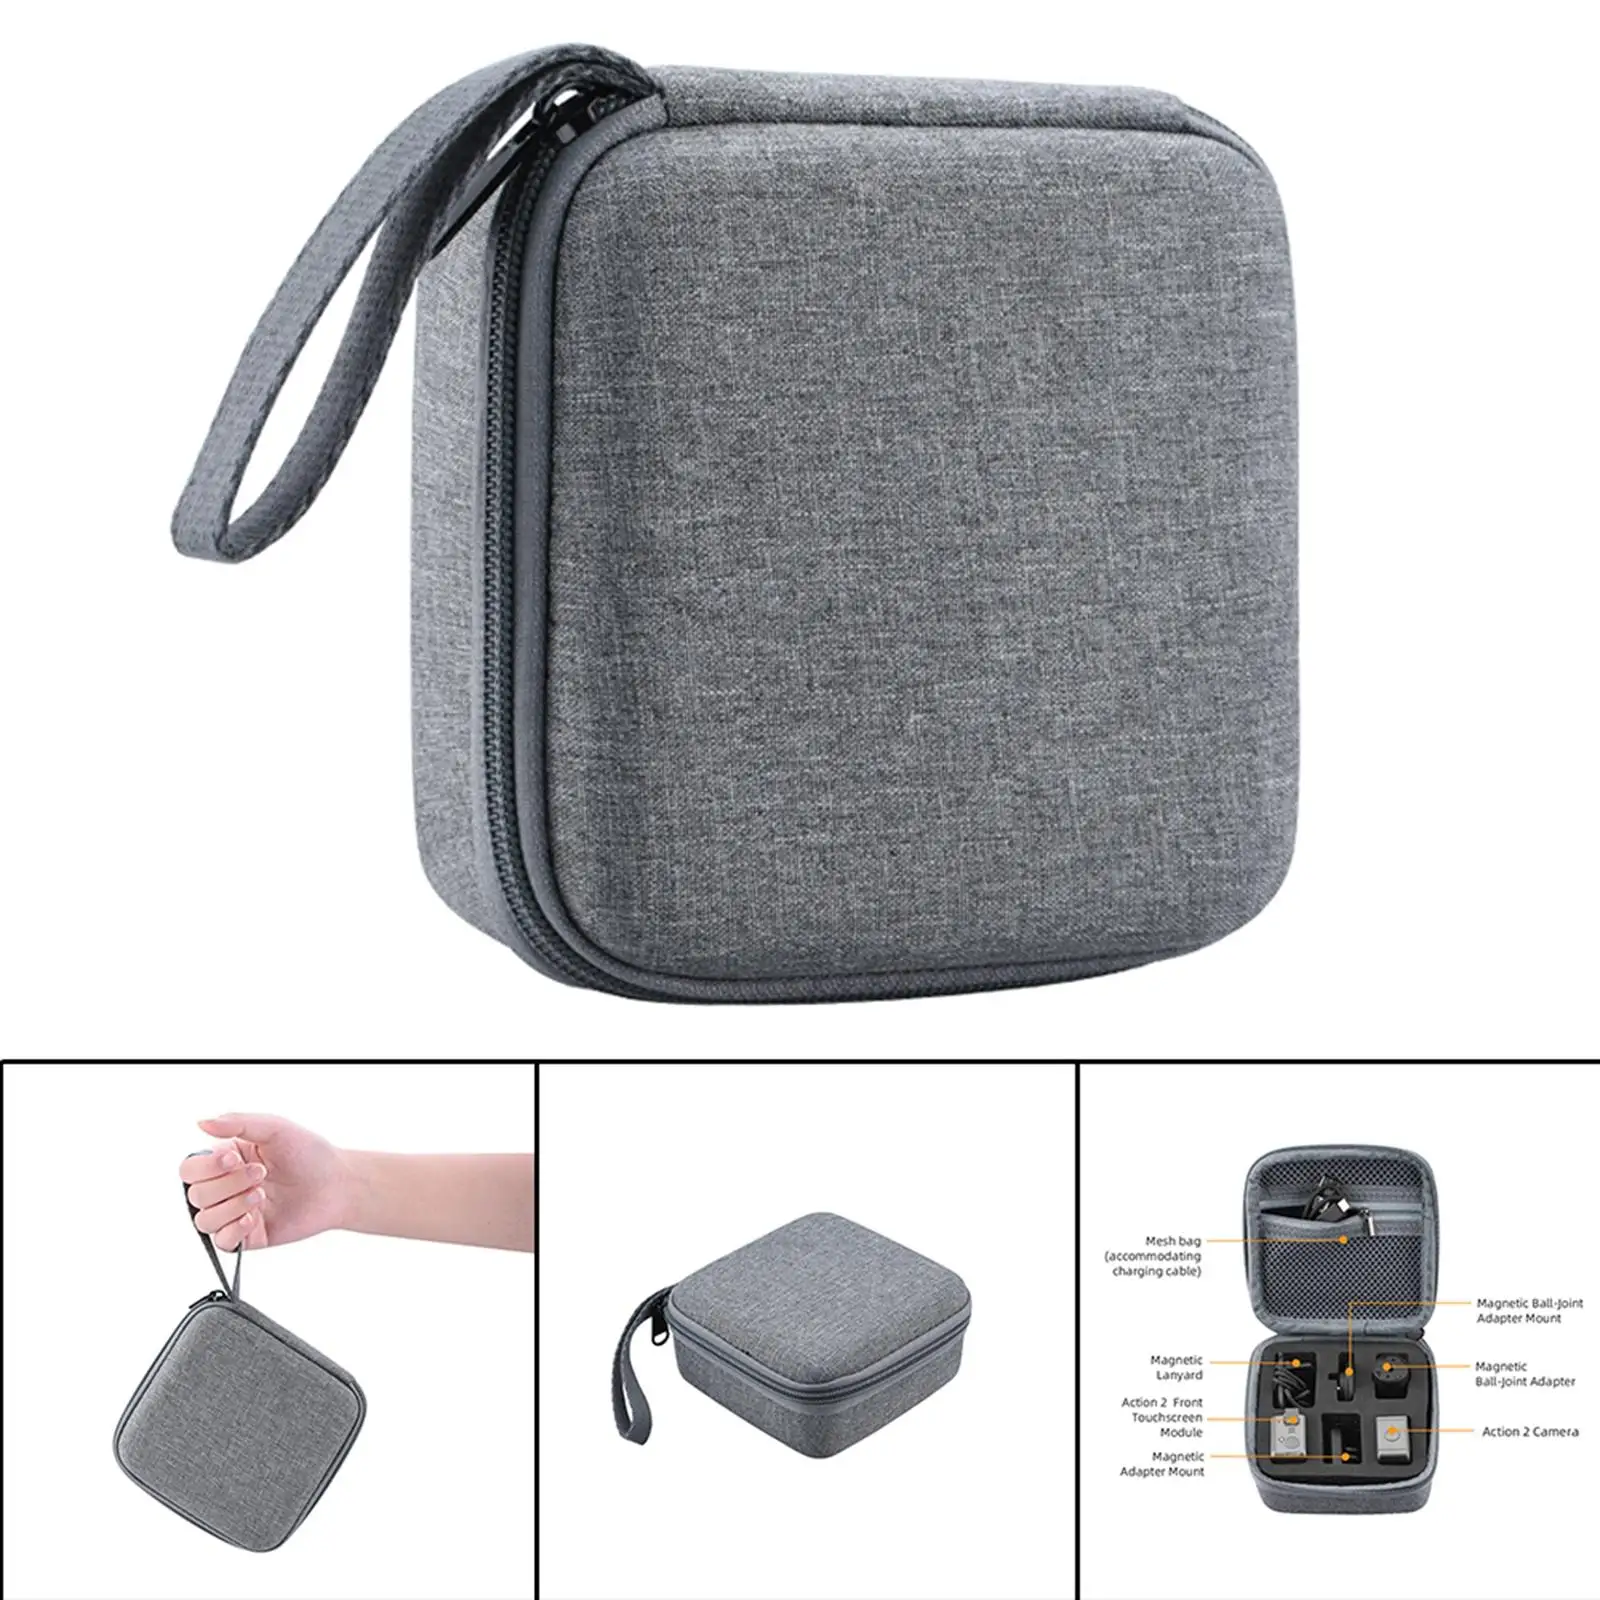 Storage Bag, Protective ,Portable Lanyard Travel Case Accessories Shock Absorber Handbag Carrying Case  2 Adapter Power Module